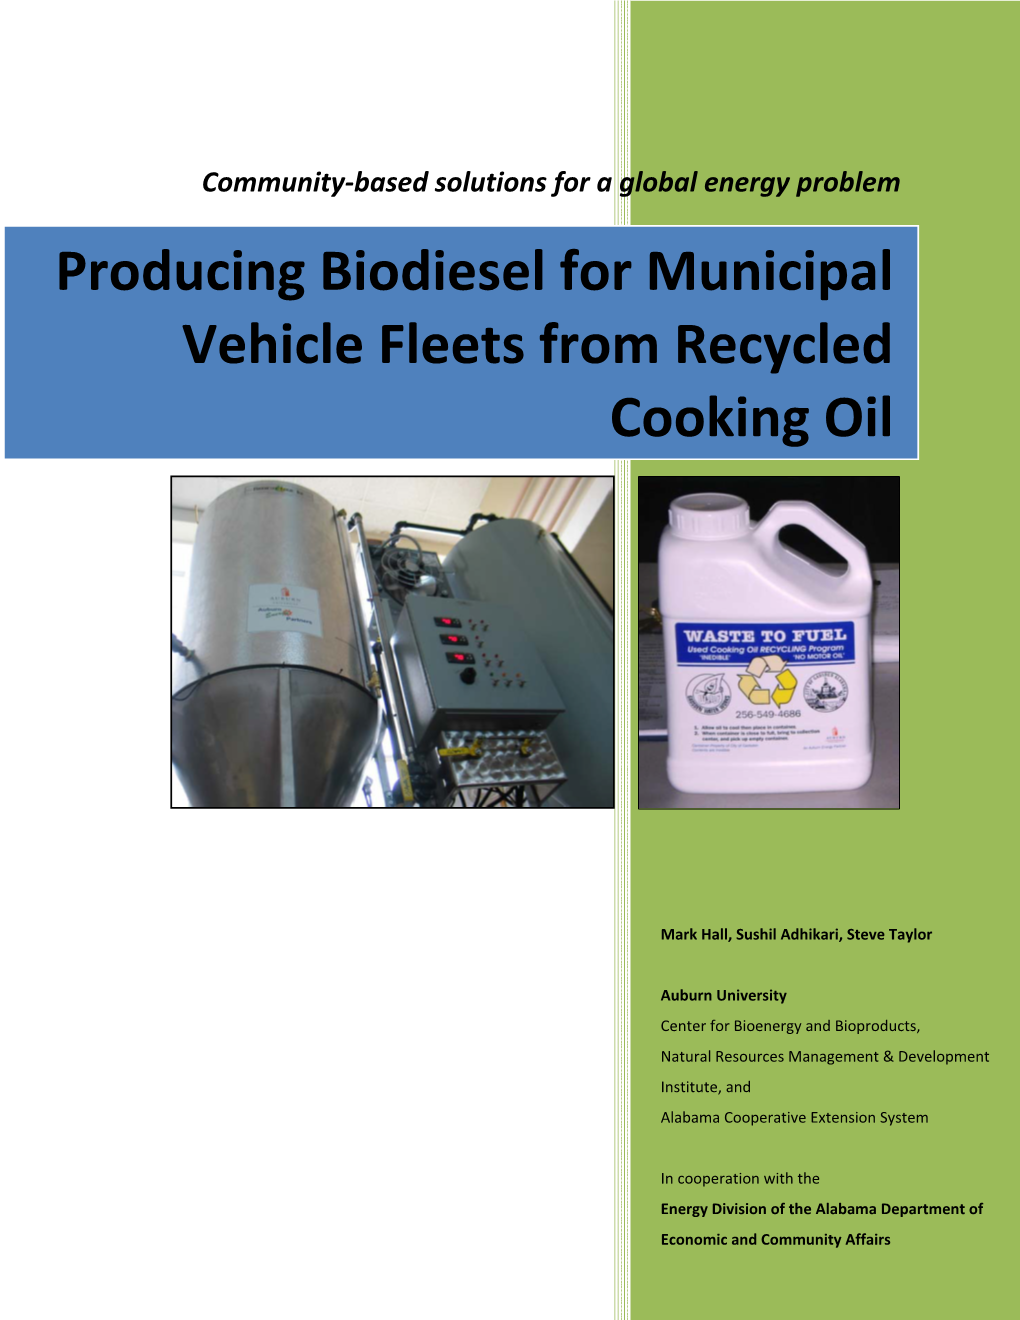 Producing Biodiesel for Municipal Vehicle Fleets from Recycled Cooking Oil